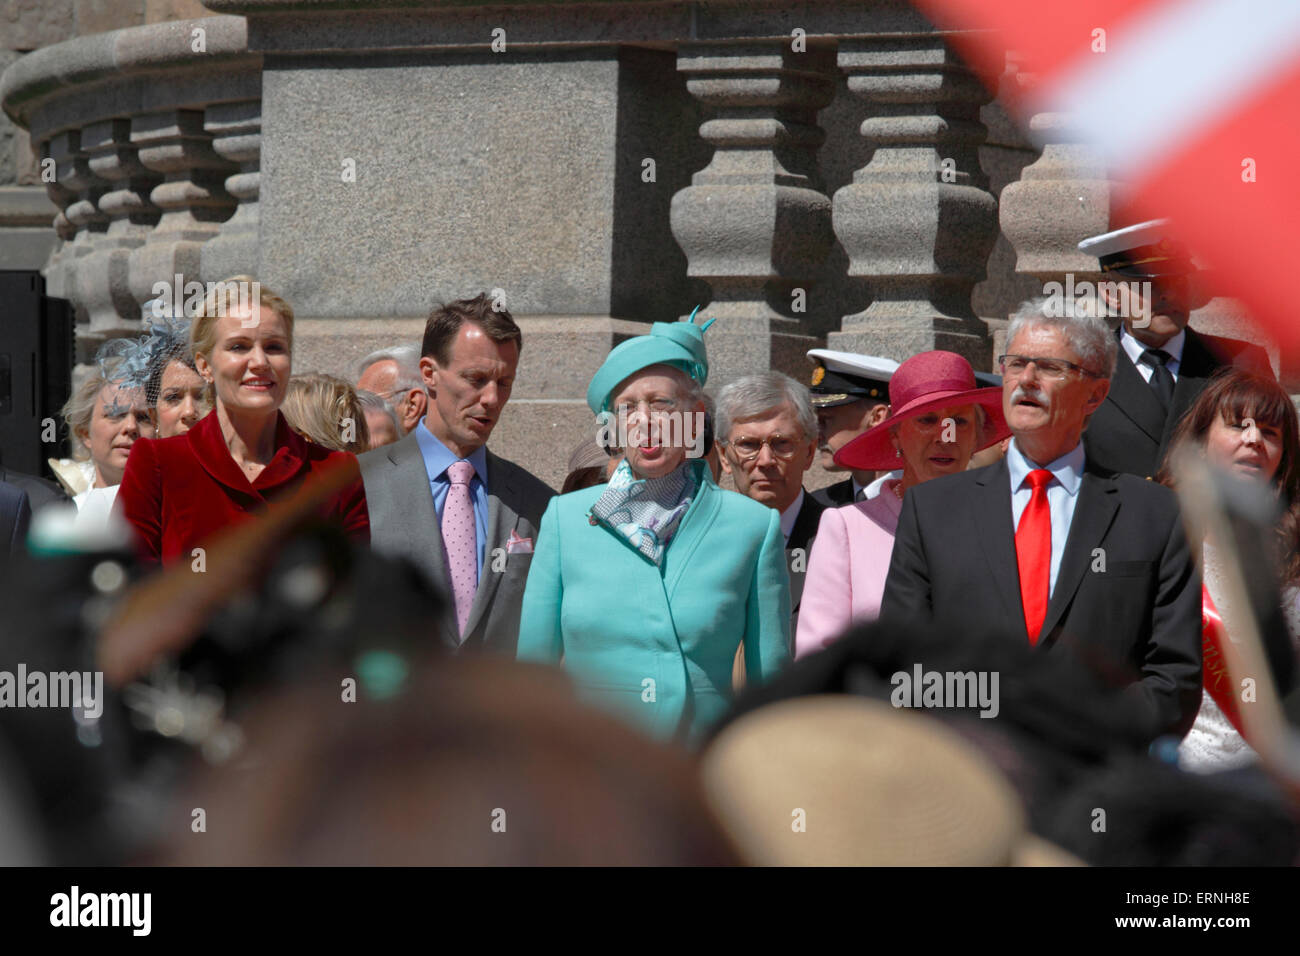 Copenhagen, Denmark, 5th June, 2015. Prime Minister Helle Thorning-Schmidt, Prince Joachim, H.M. Queen Margrethe II of Denmark and the Speaker of Parliament Mogens Lykketoft in the singing of the national anthem after receiving the commemorative parade in historic garments and speeches in celebration of the 100th anniversary of the constitution amendment that gave Danish women the right to vote and stand for election in 1915. Credit:  Niels Quist/Alamy Live News Stock Photo